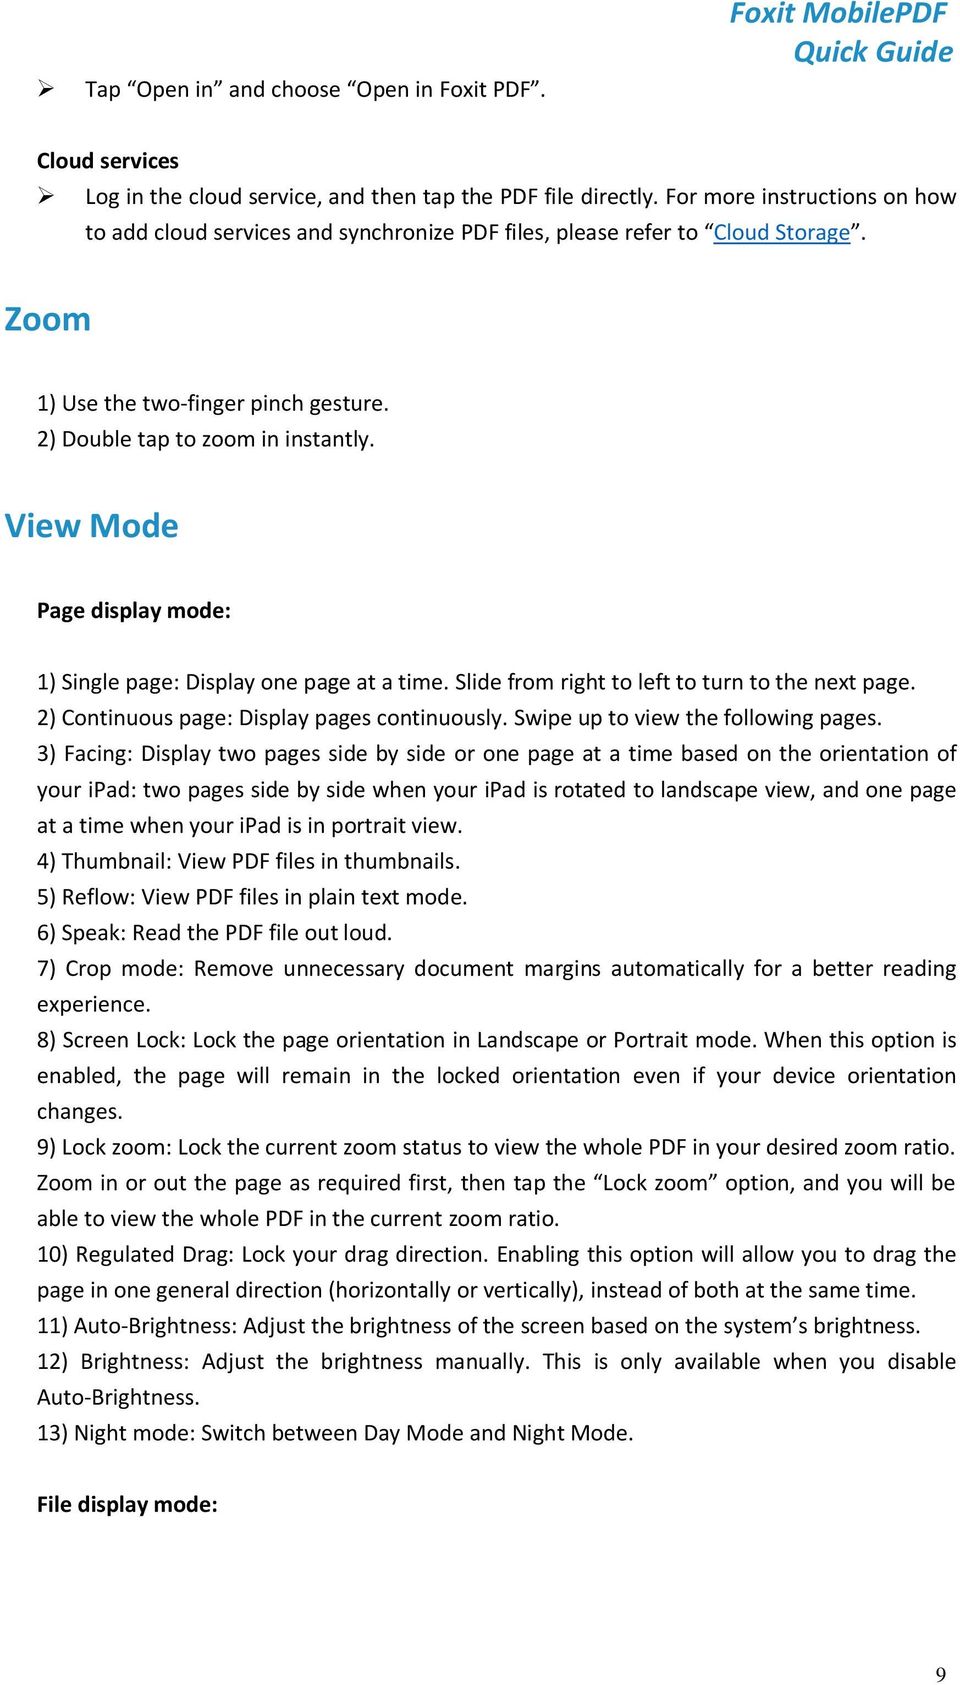 View Mode Page display mode: 1) Single page: Display one page at a time. Slide from right to left to turn to the next page. 2) Continuous page: Display pages continuously.